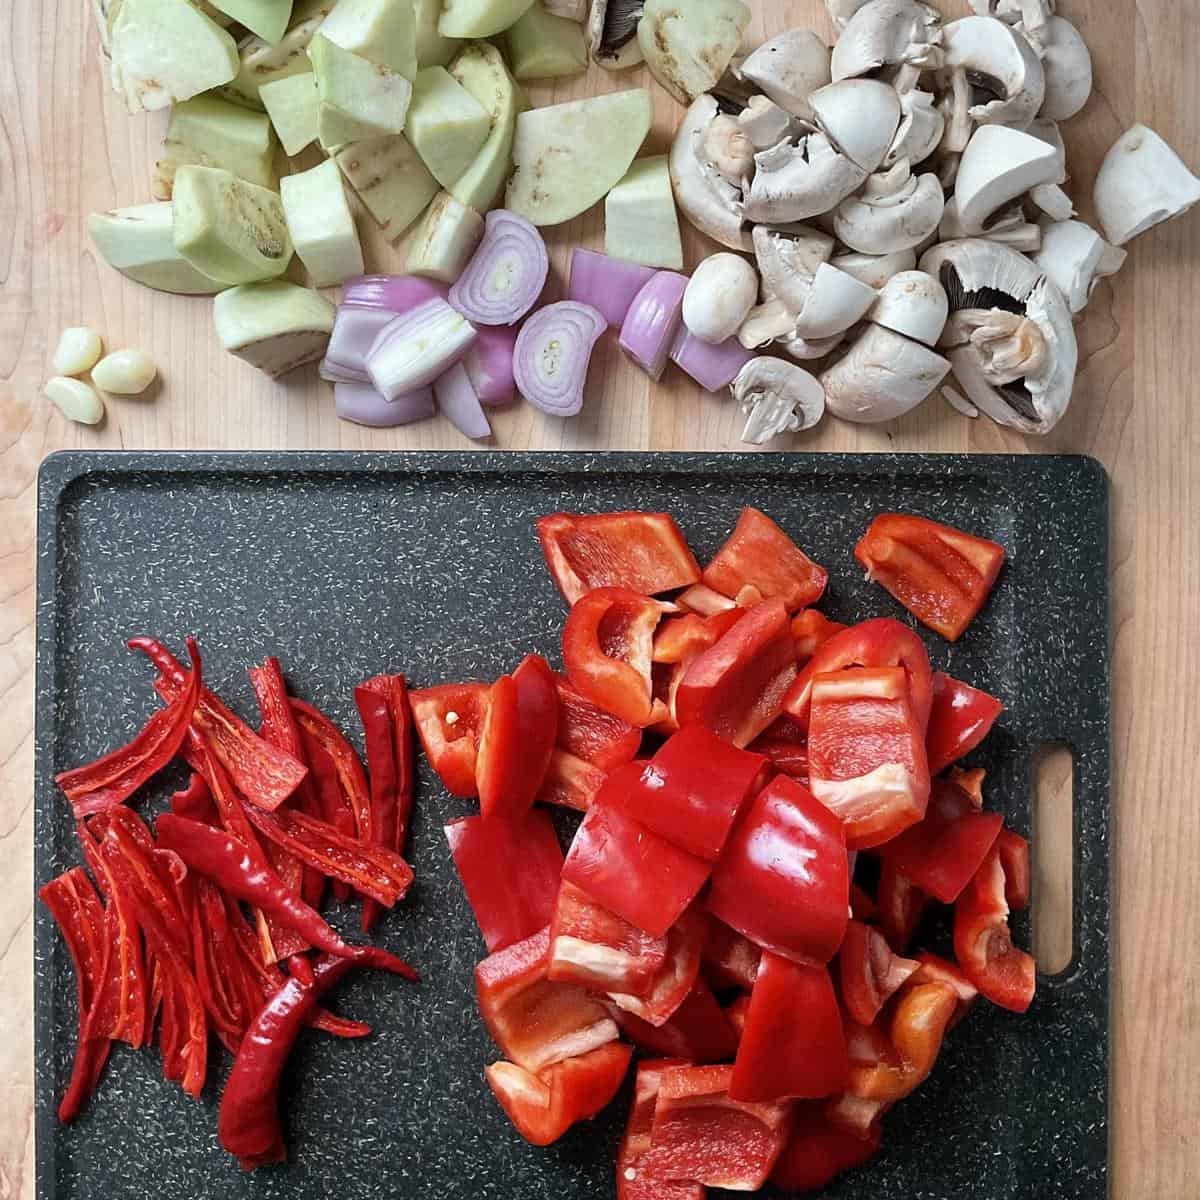 Chopped vegetables on a cutting board.